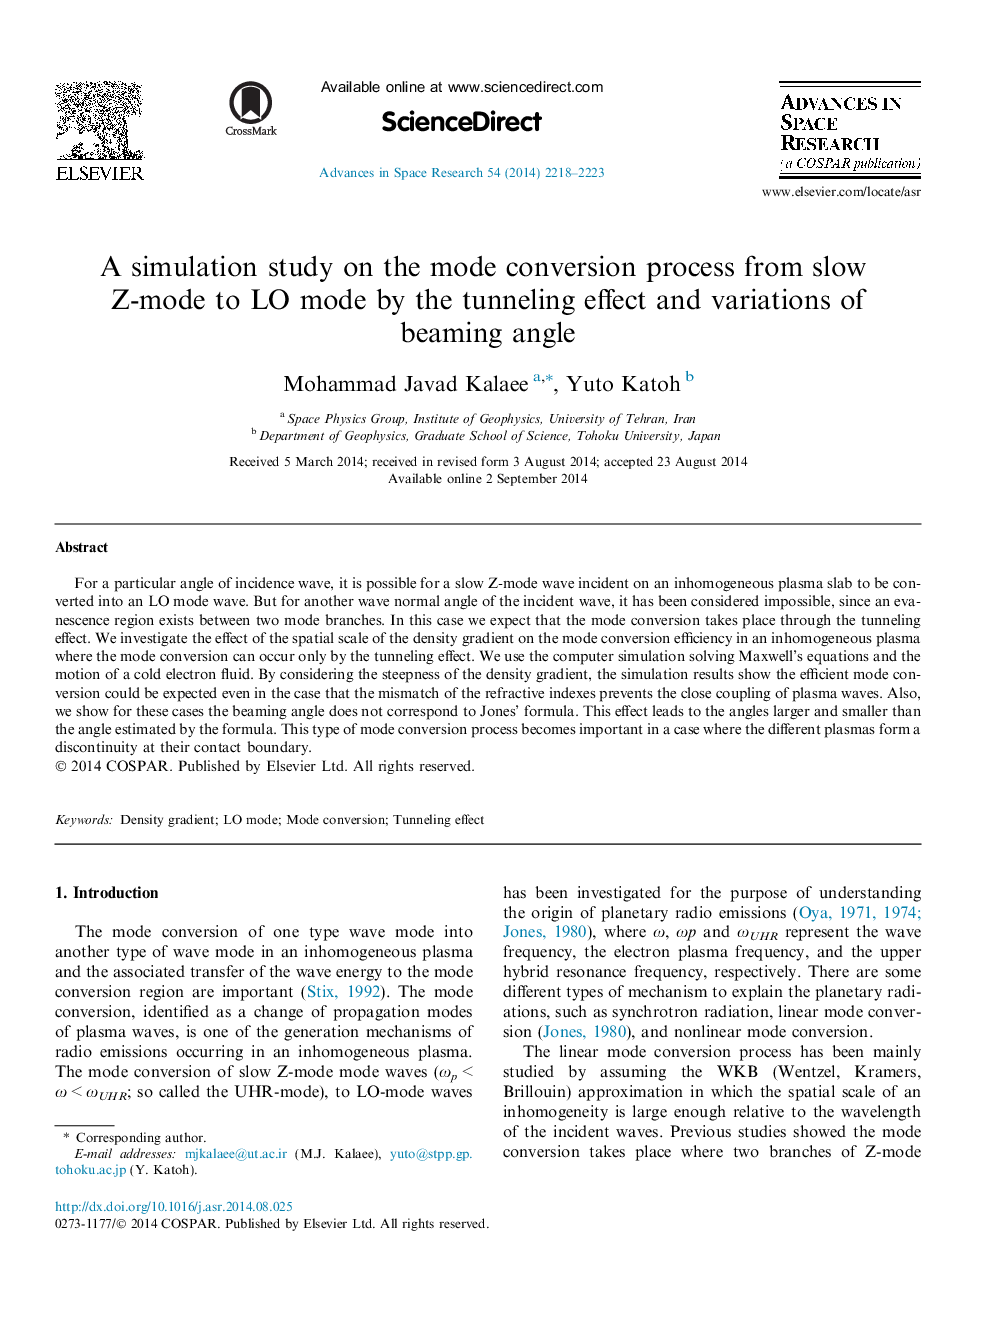 A simulation study on the mode conversion process from slow Z-mode to LO mode by the tunneling effect and variations of beaming angle